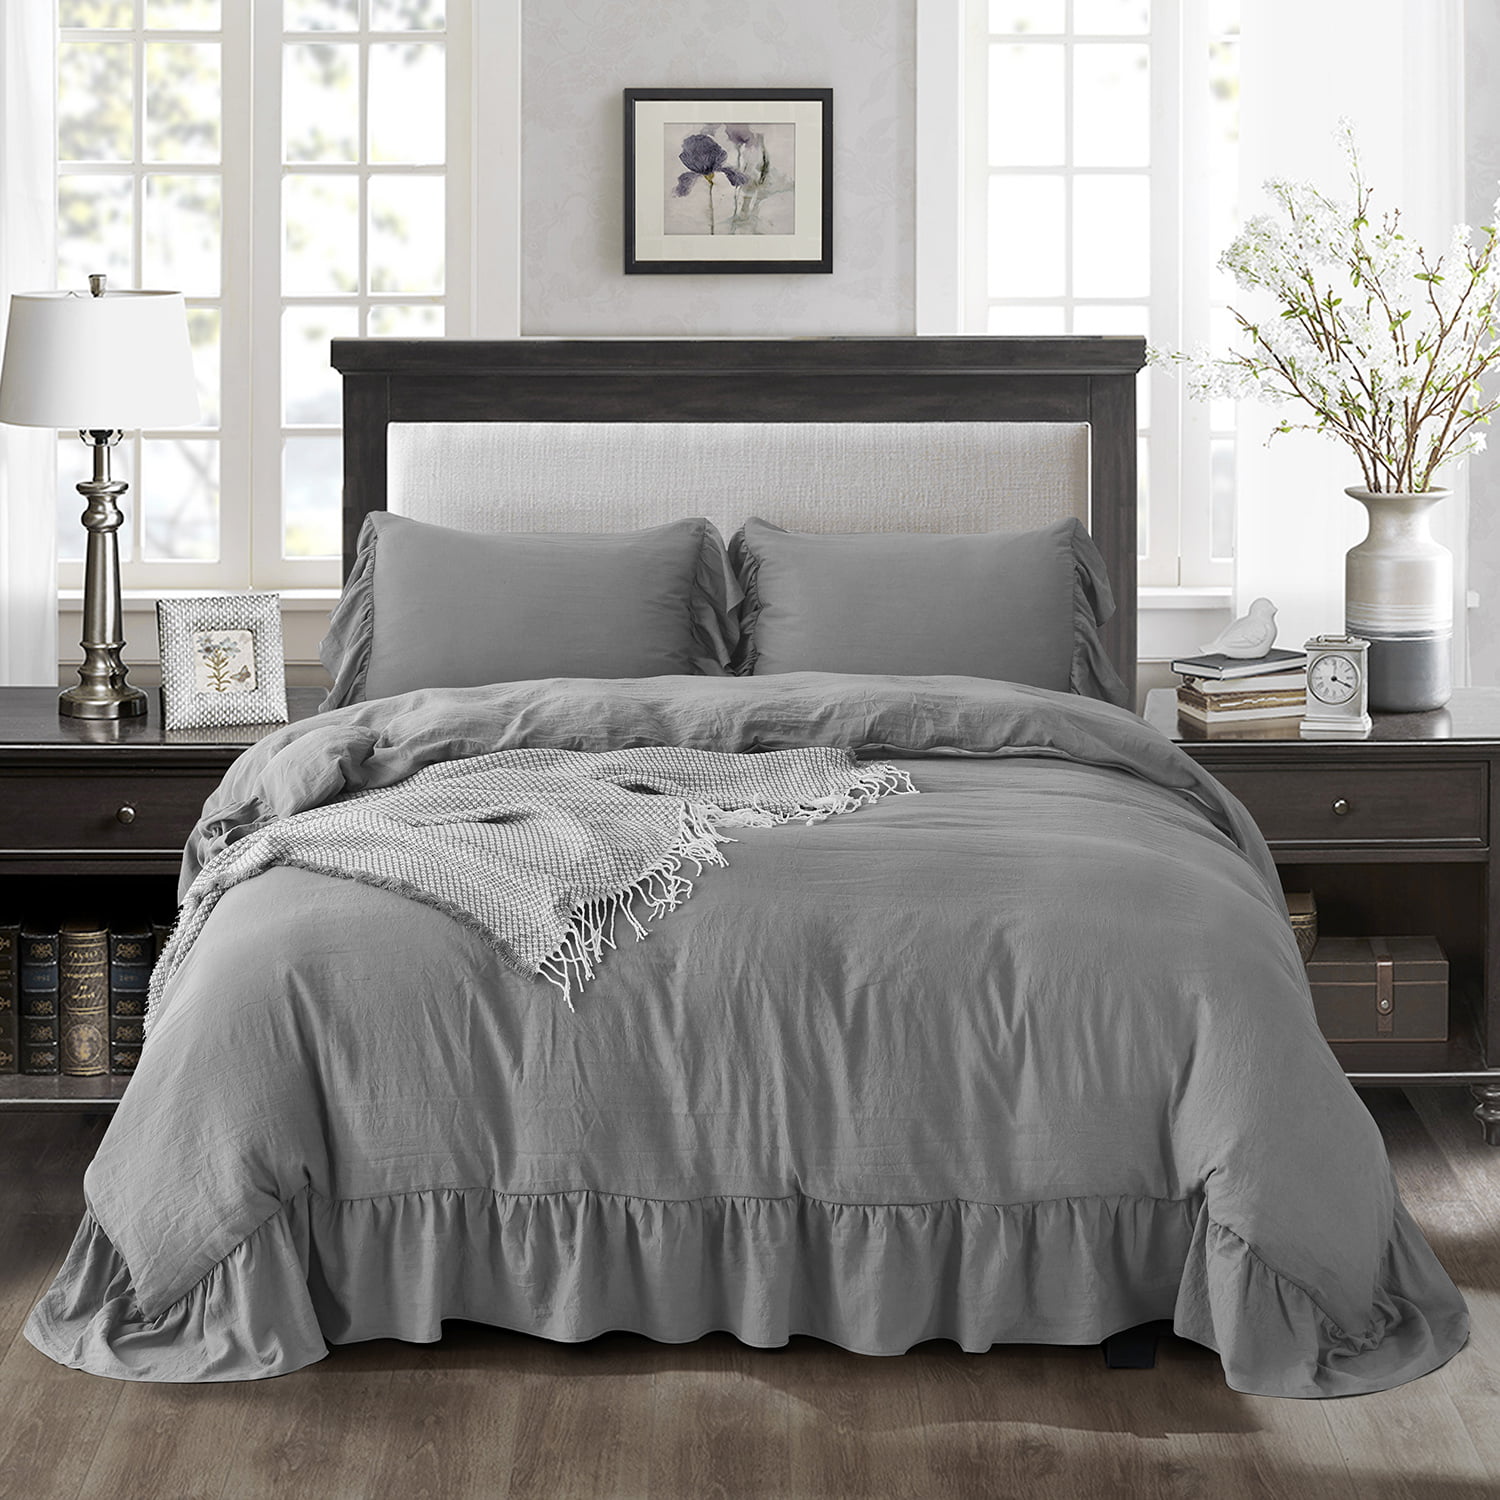 Homechoice 3 Piece Washed Duvet Cover King with Handcraft Ruffle 100 Brushed Fabric Comforter